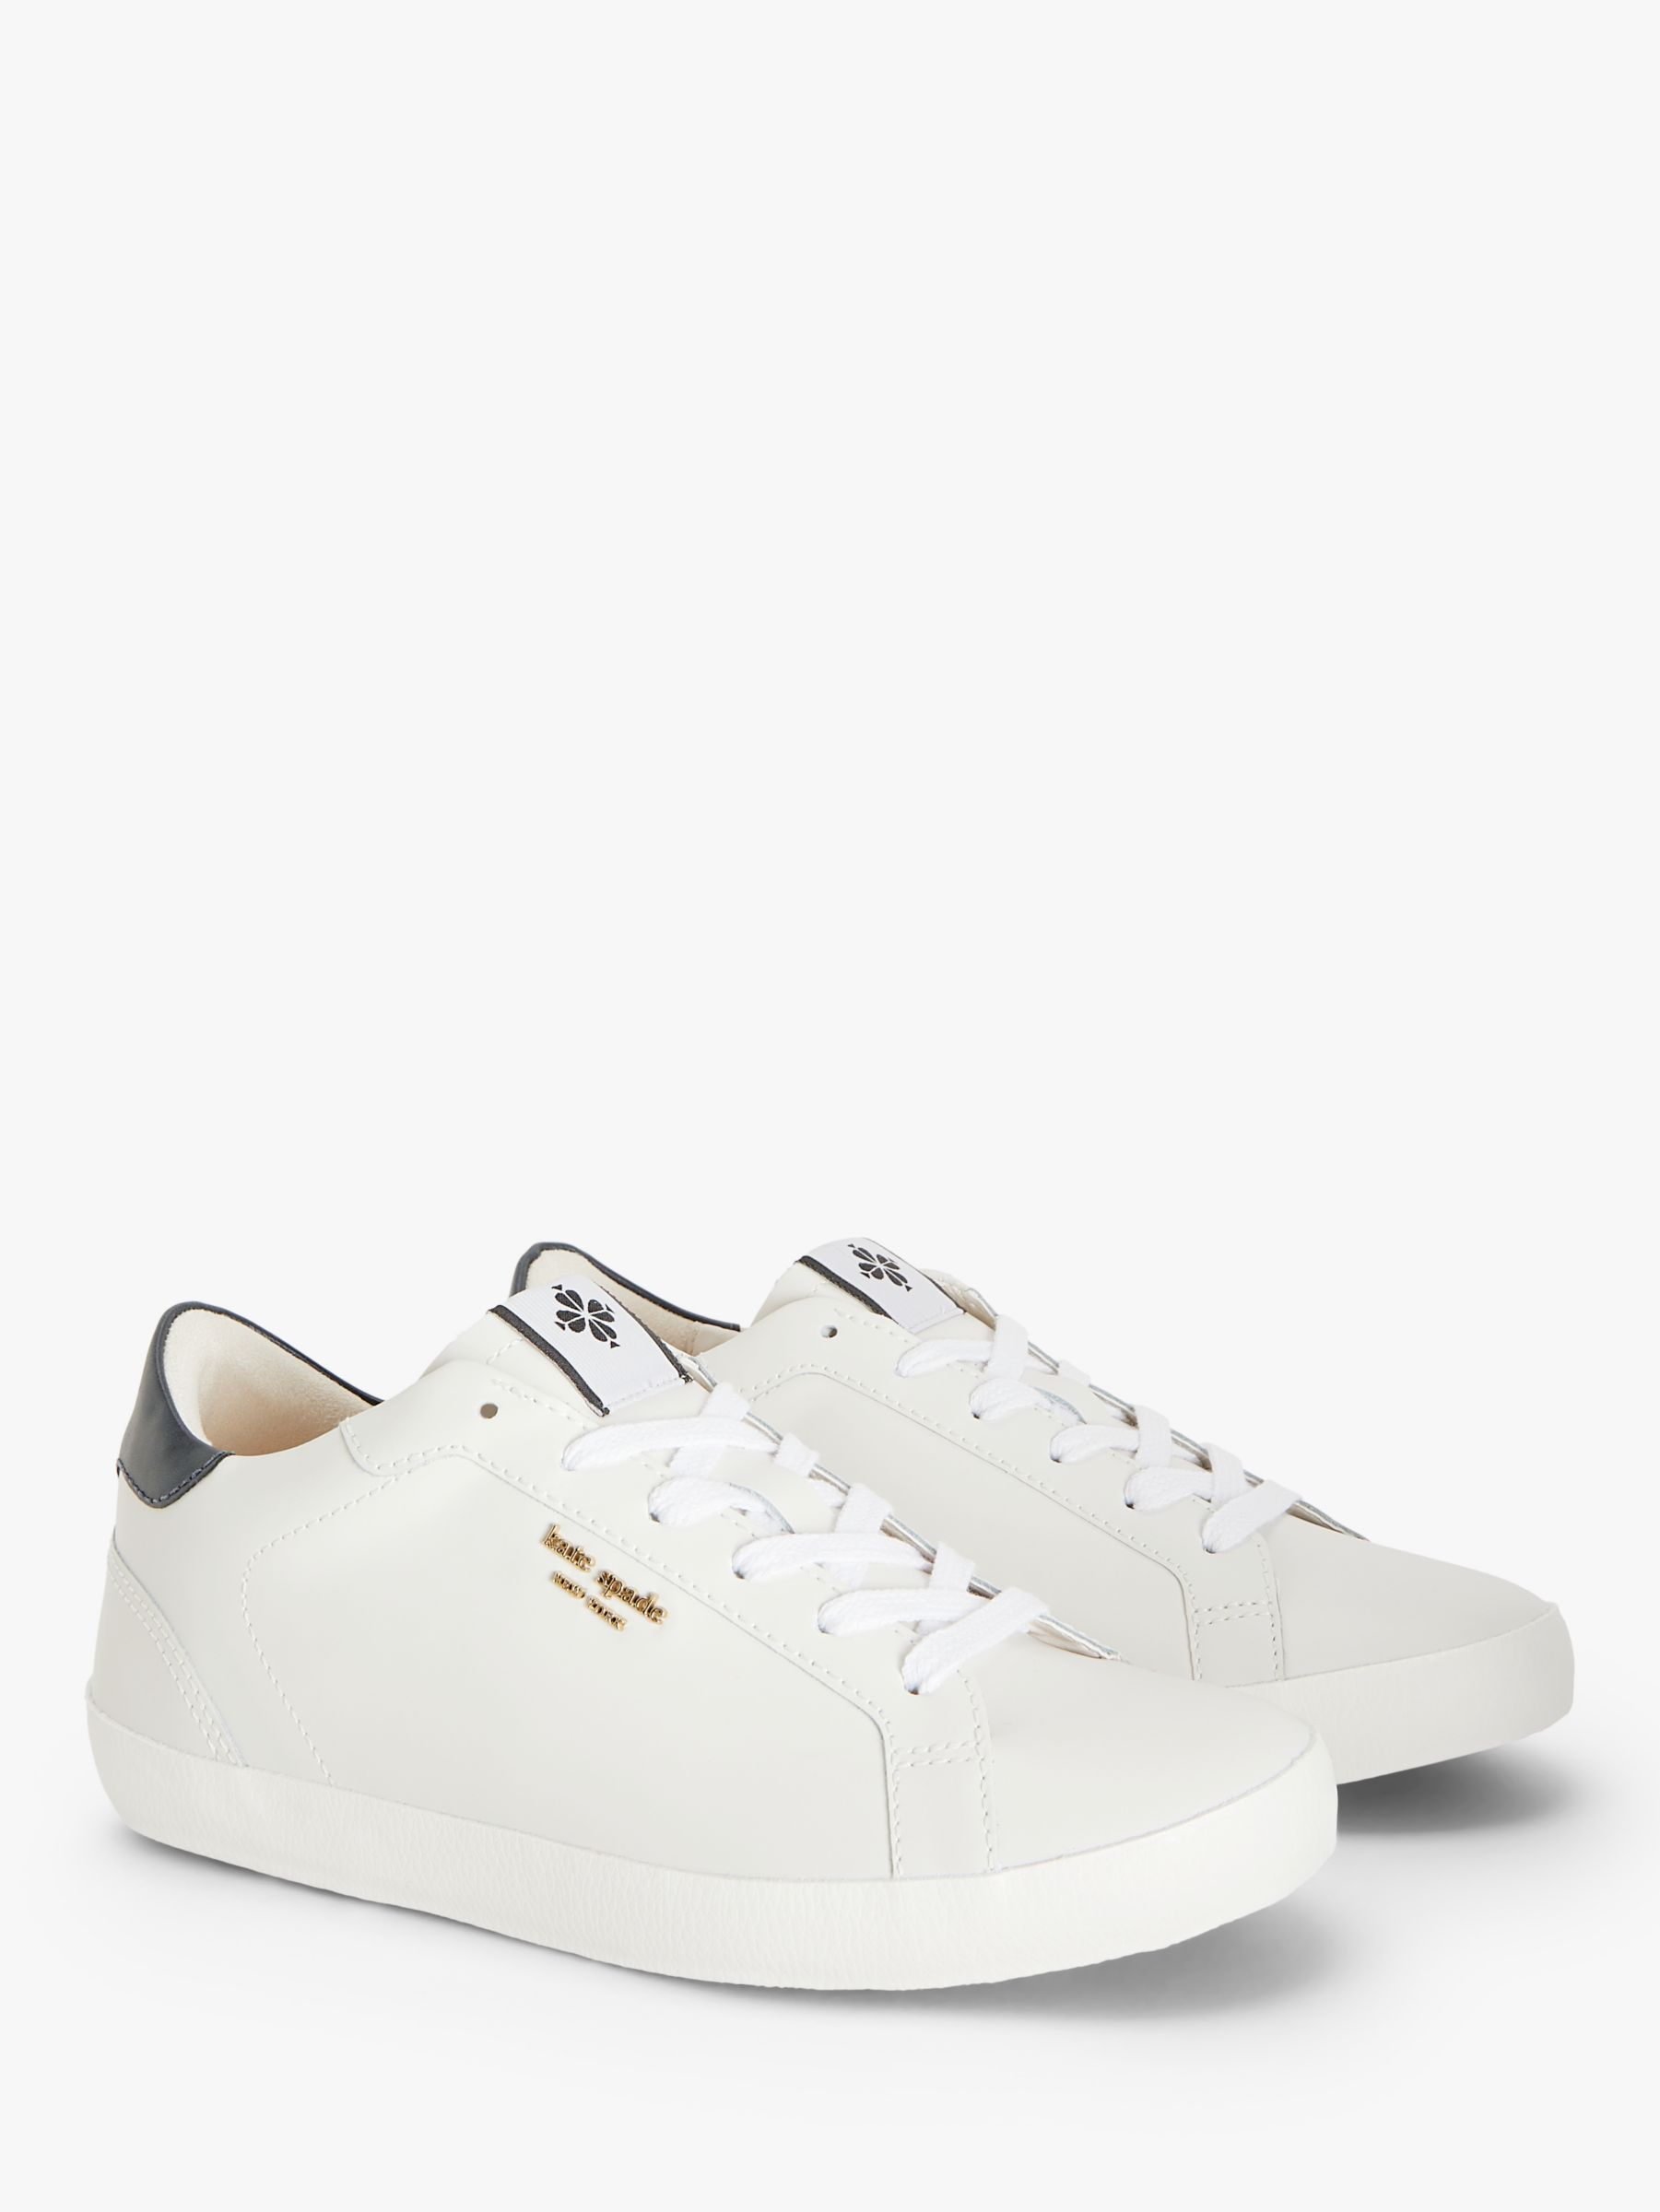 kate spade new york Ace Low Top Leather Trainers, Optic White/Black